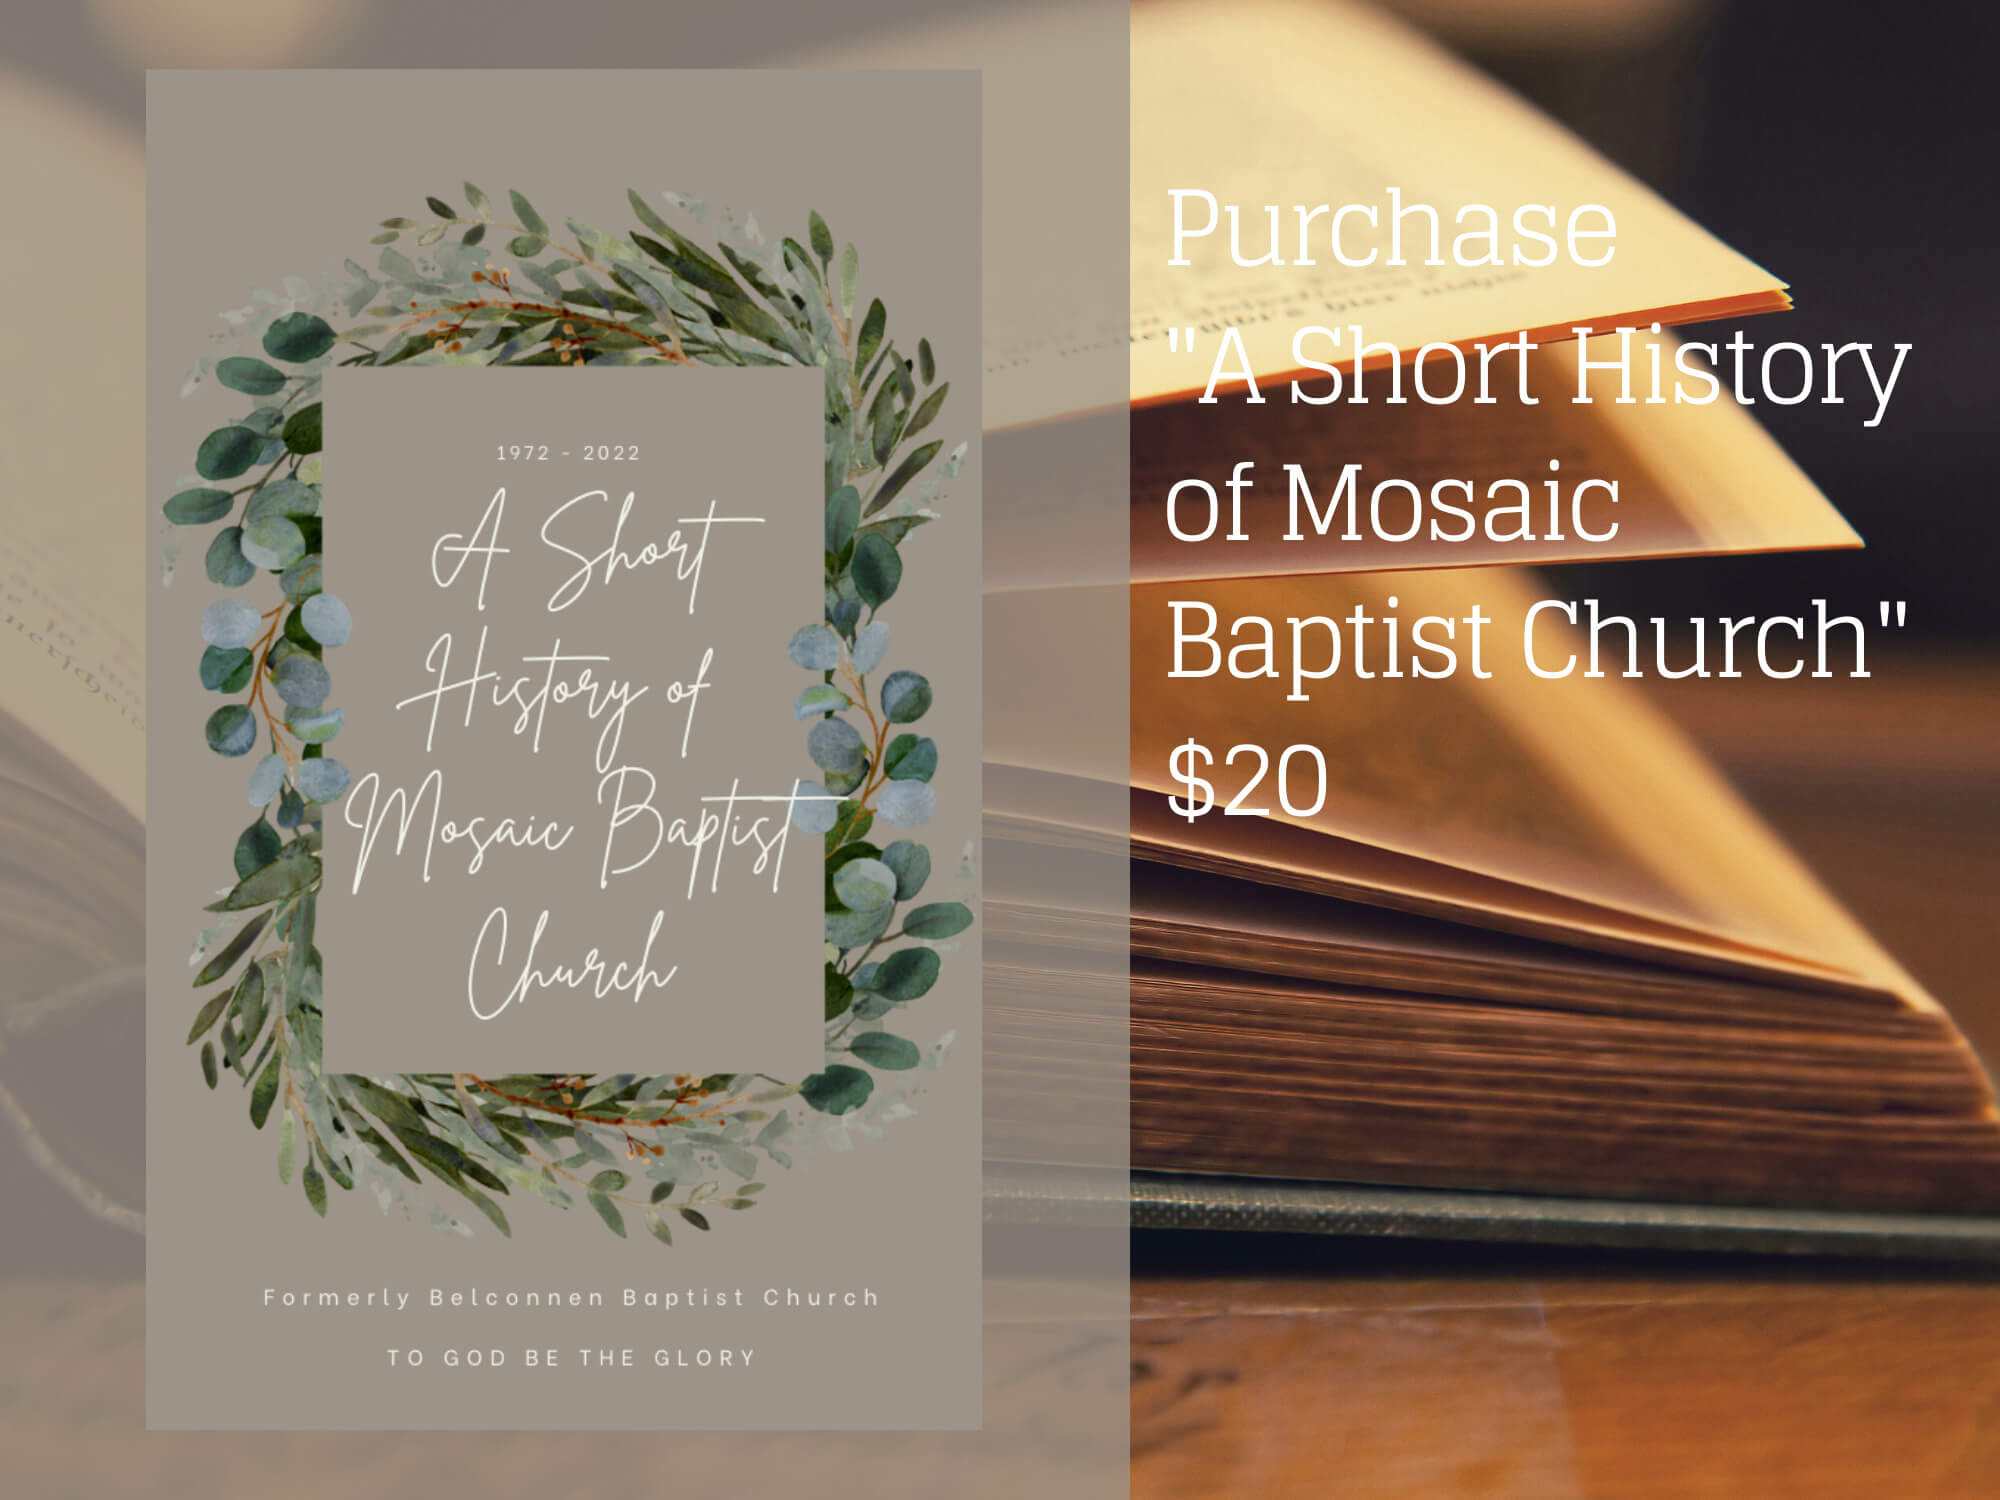 Image of the ad for the book A short History of Mosaic Baptist Church